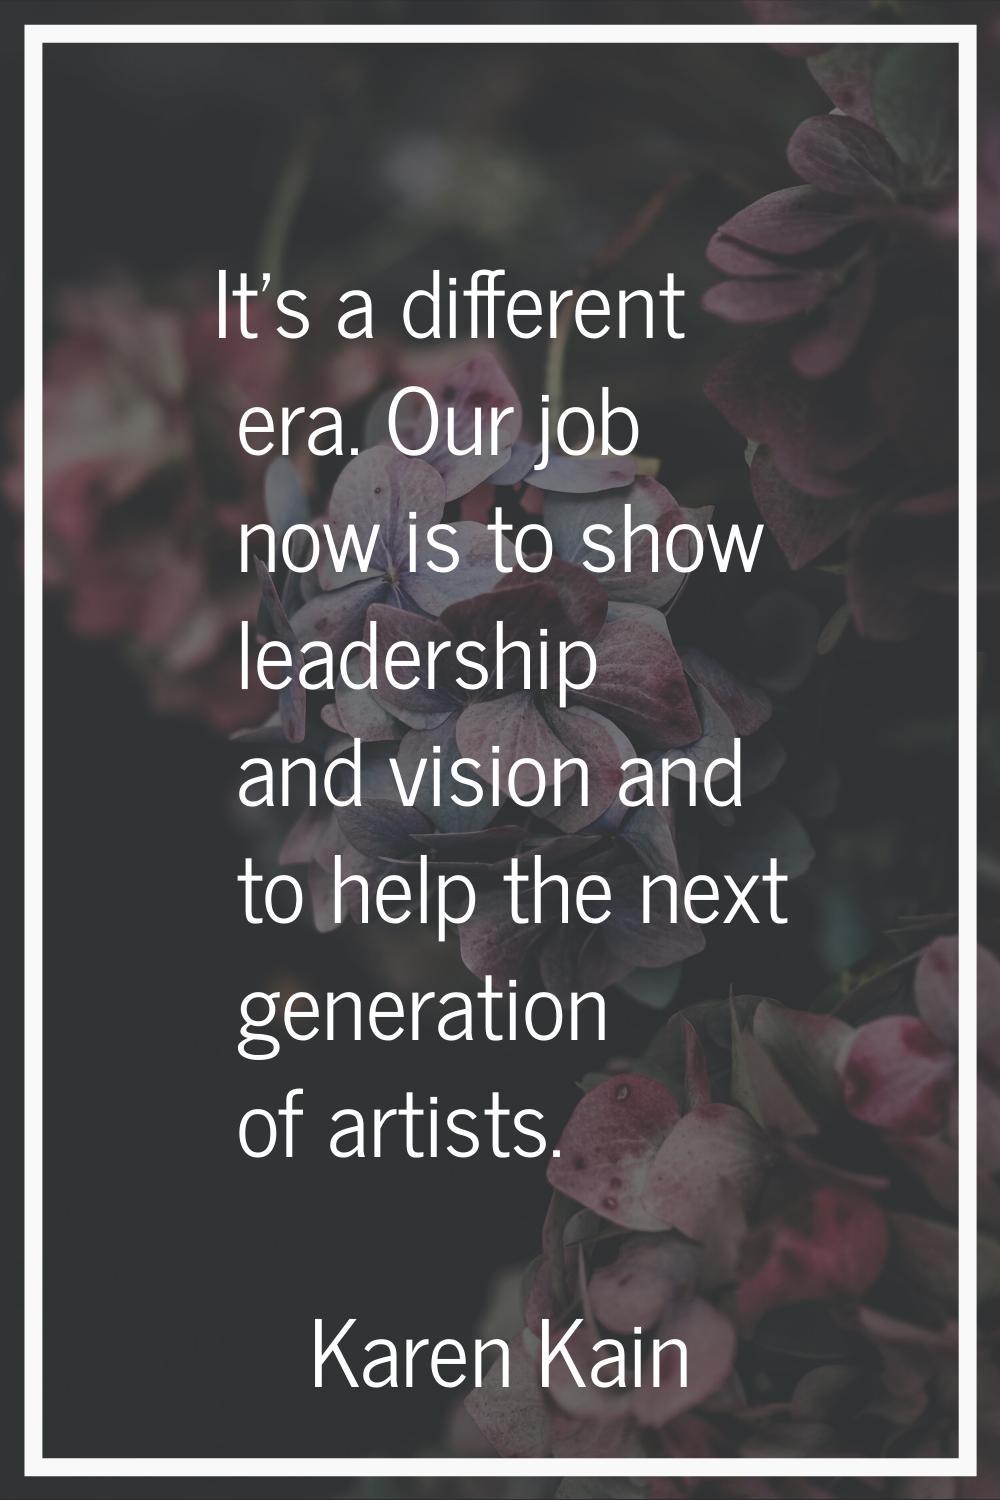 It's a different era. Our job now is to show leadership and vision and to help the next generation 